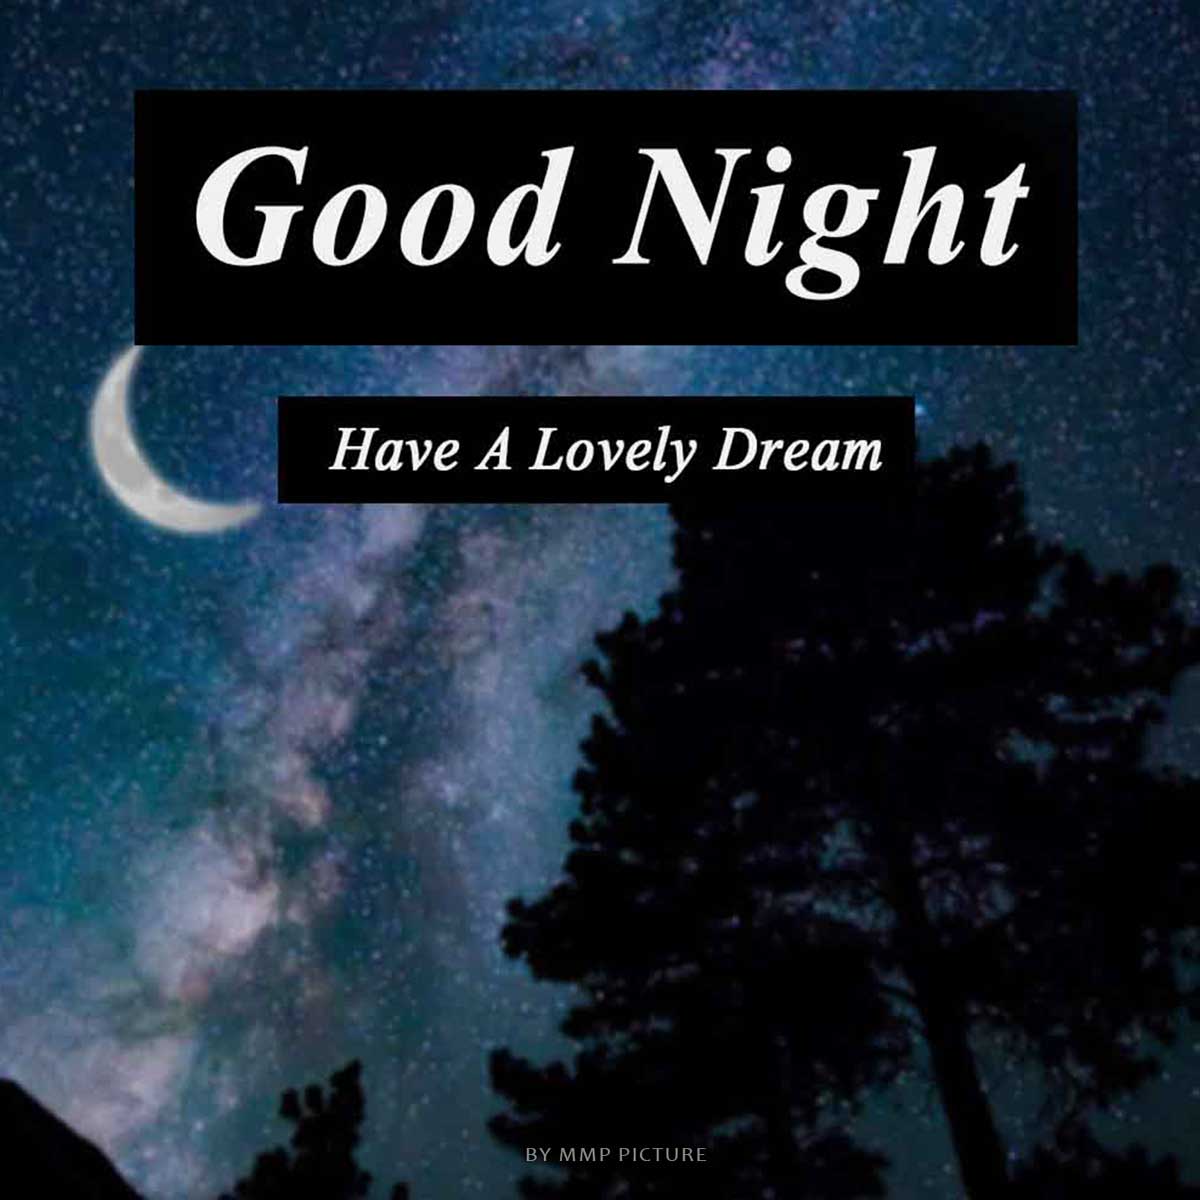 Have A Lovely Dream Good Night Image For WhatsApp